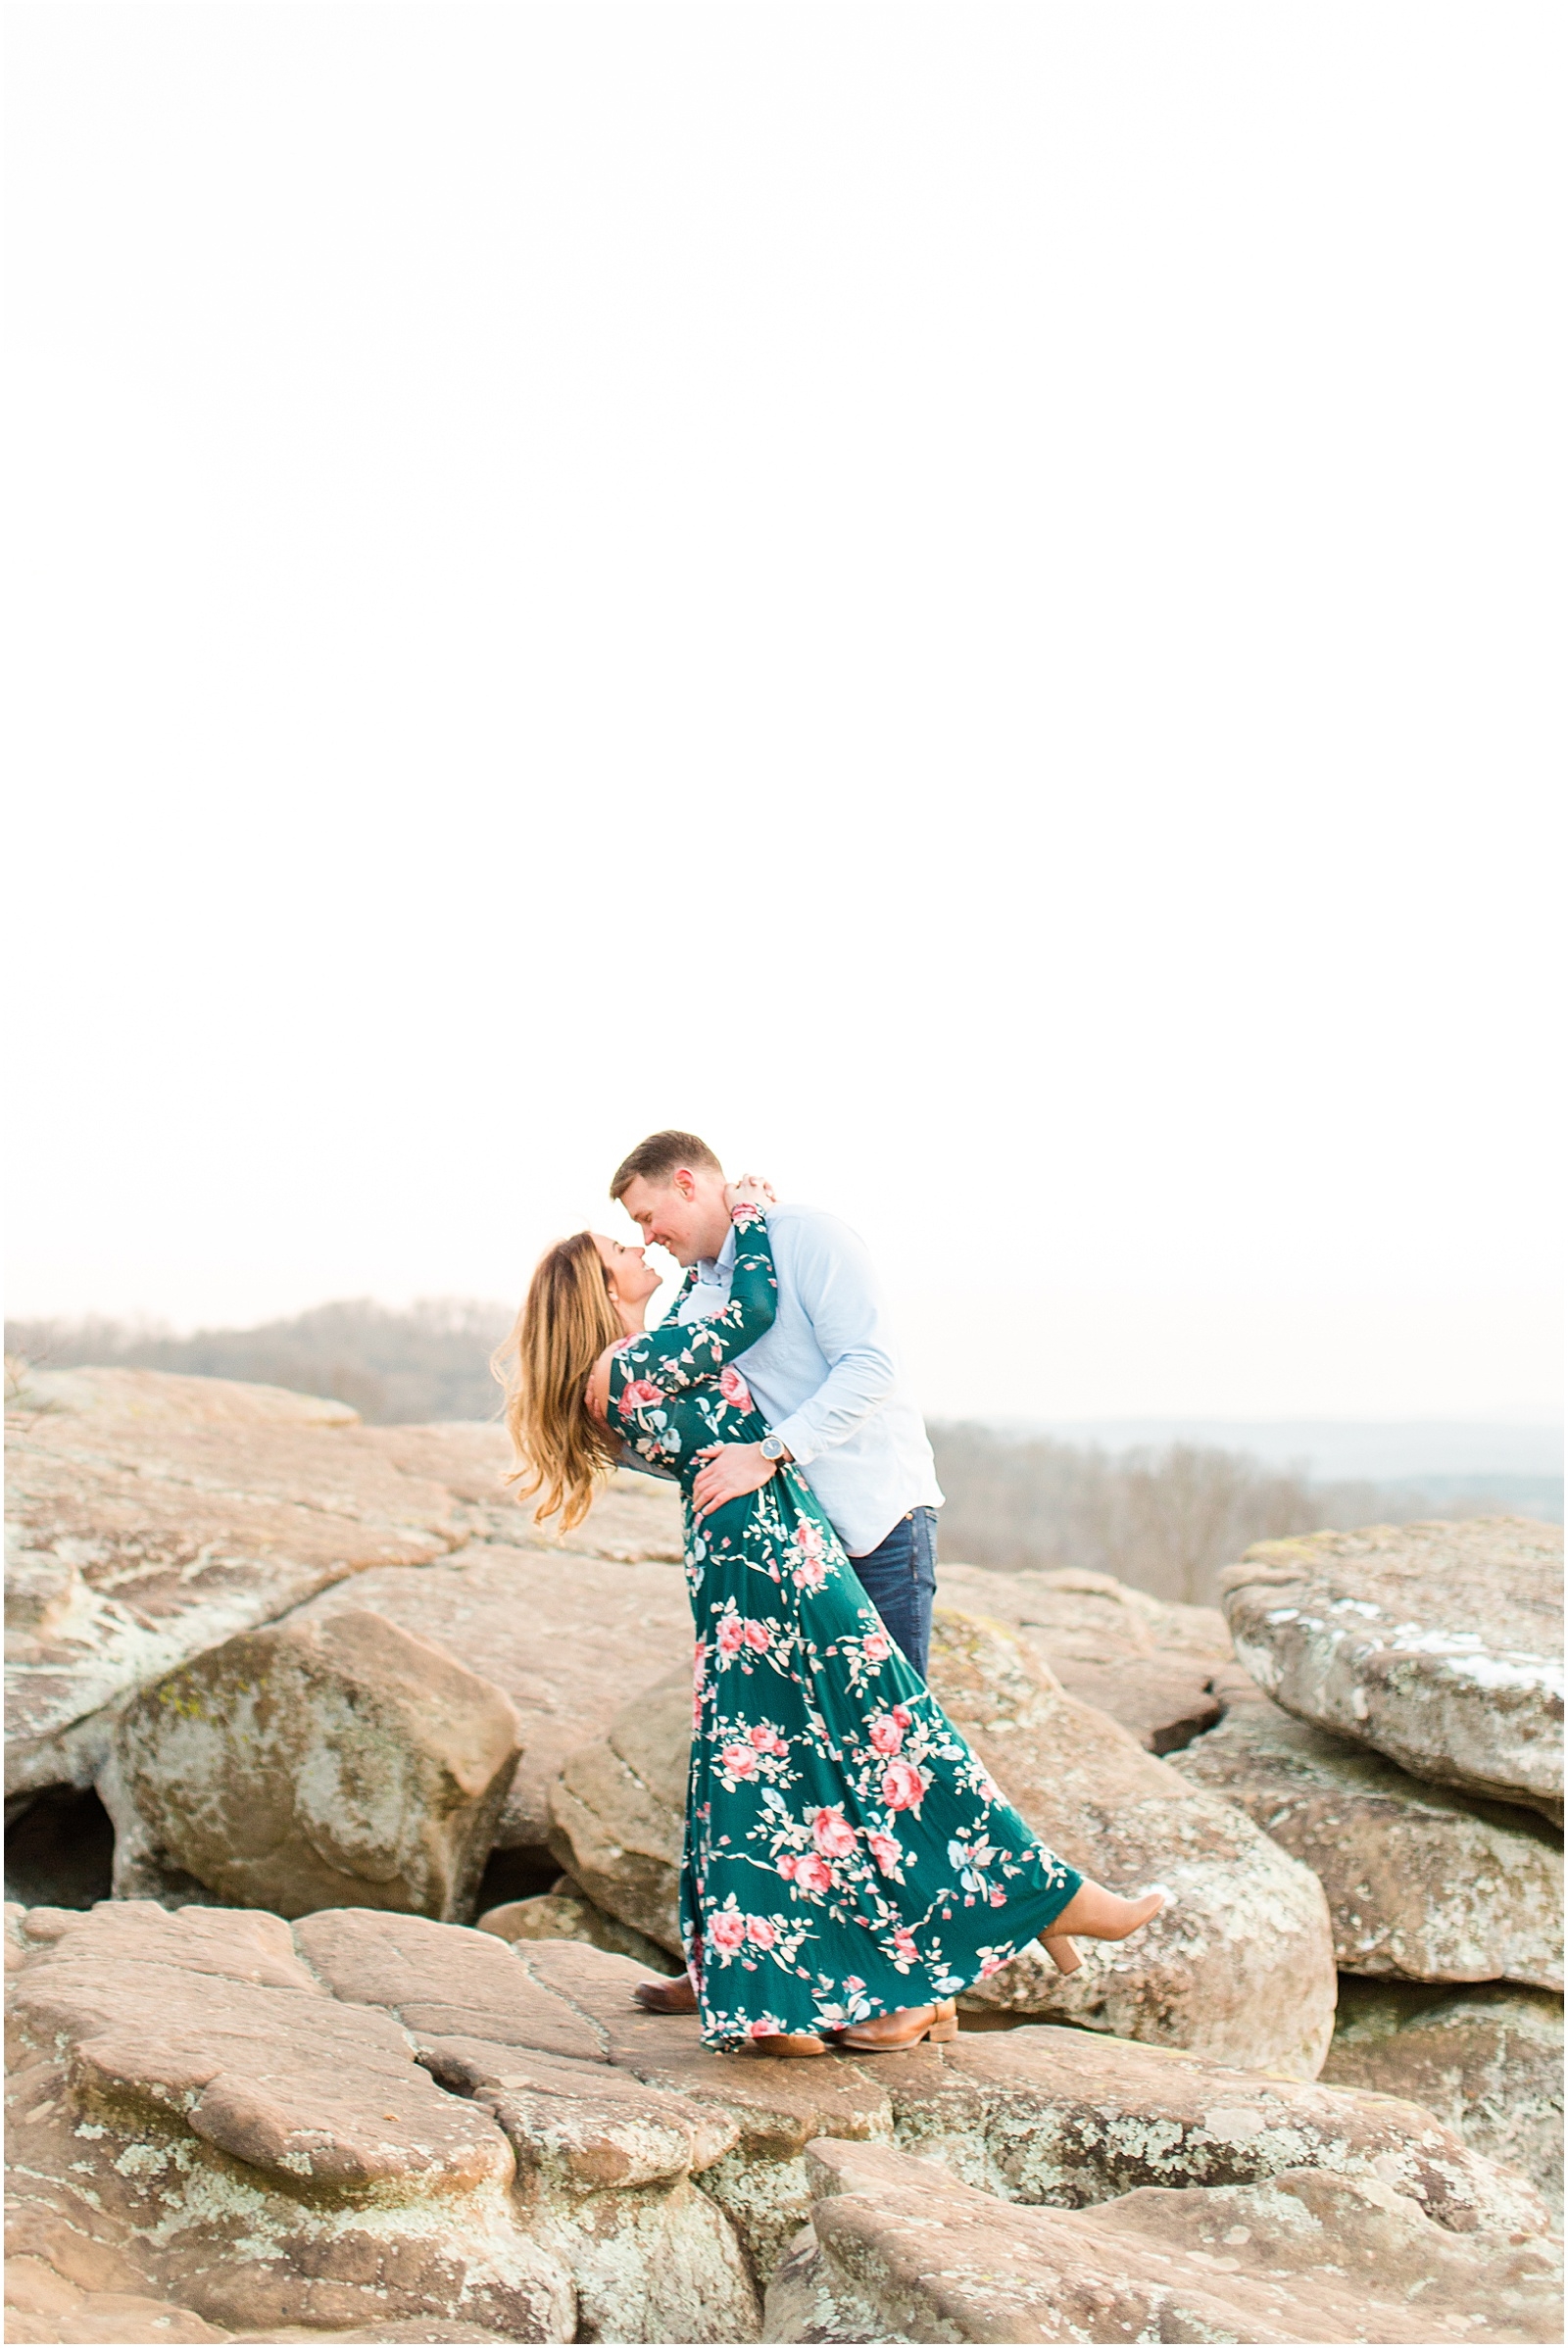 A Sunny Garden of the Gods Engagement Session | Shiloh and Lee | Bret and Brandie Photography084.jpg